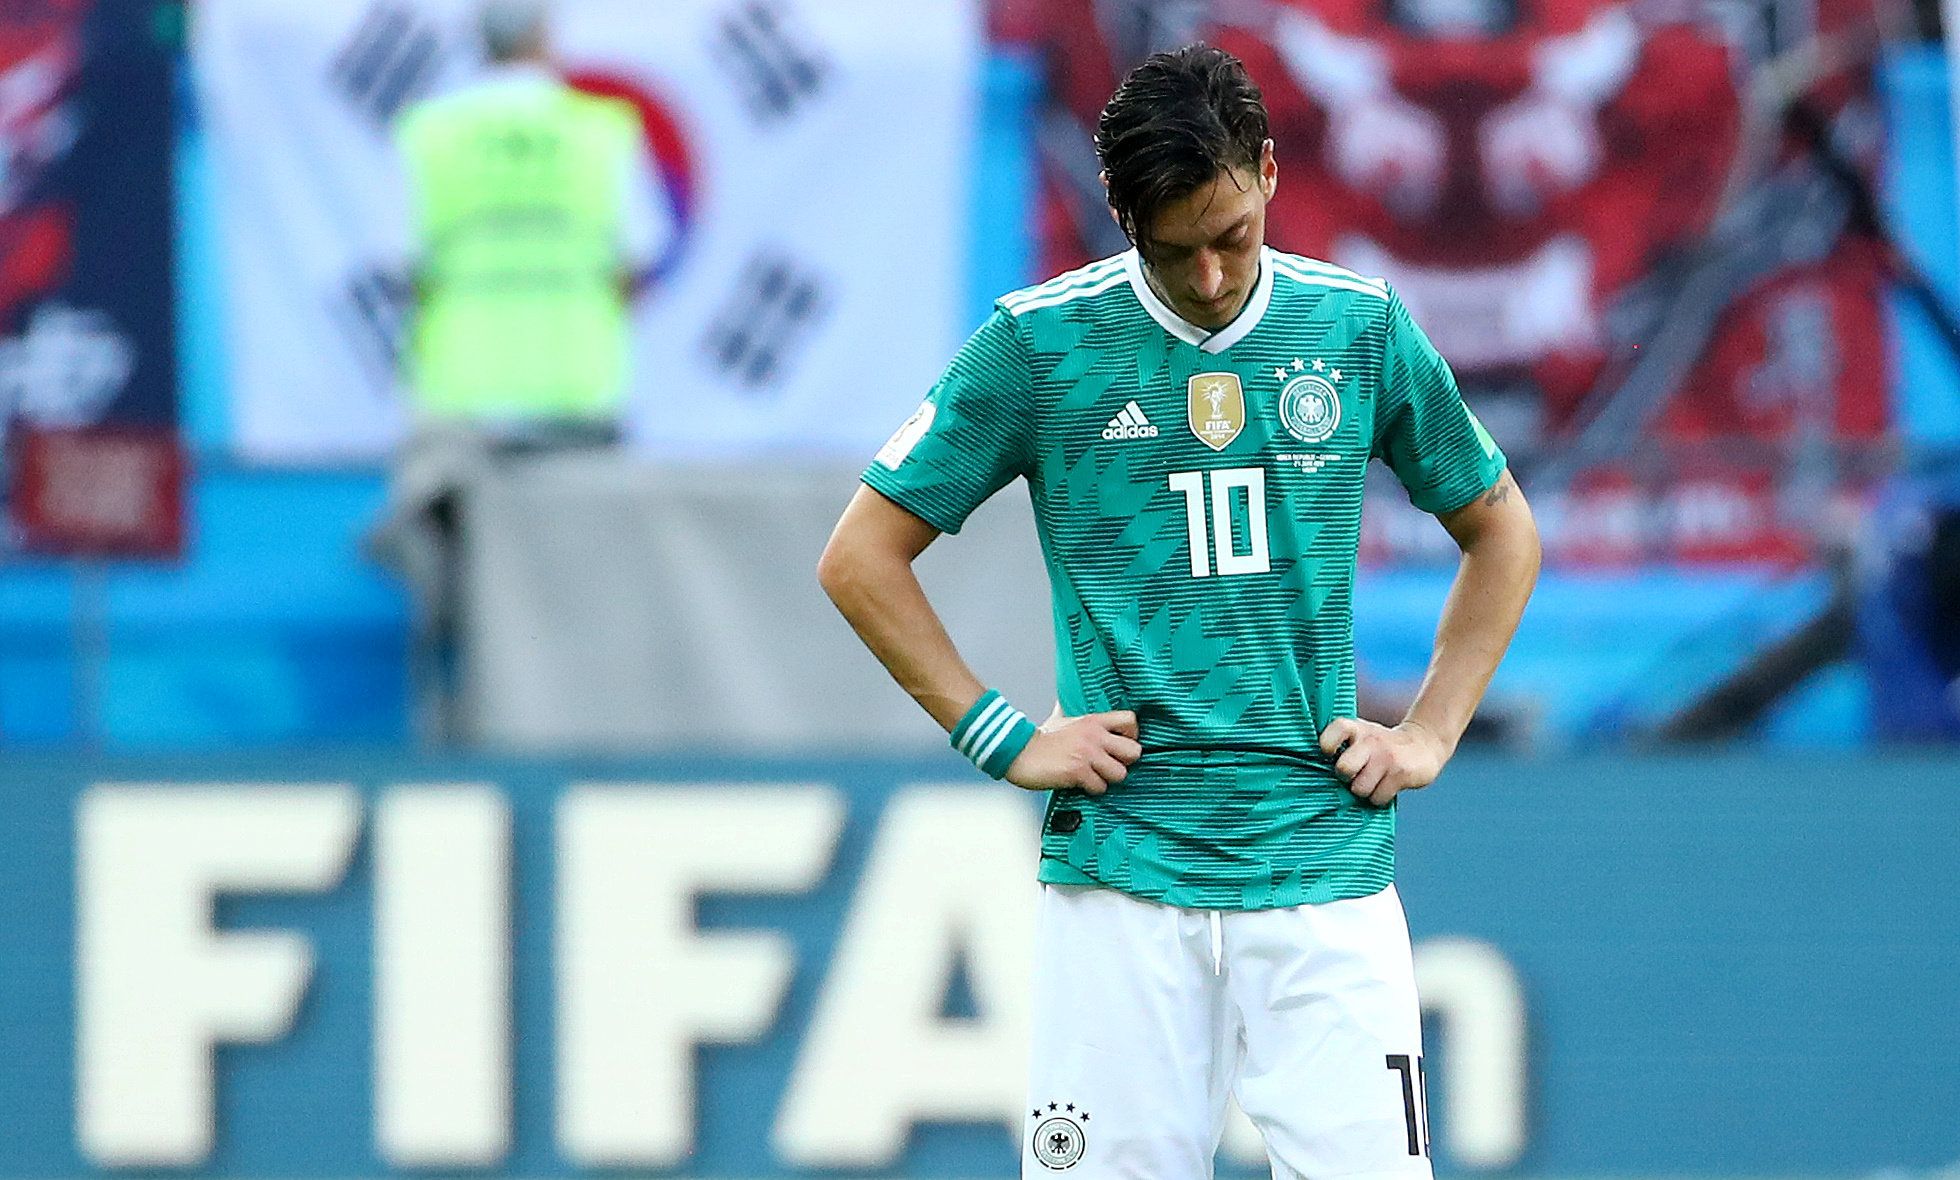 Soccer Football - World Cup - Group F - South Korea vs Germany - Kazan Arena, Kazan, Russia - June 27, 2018   Germany's Mesut Ozil looks dejected after the match    REUTERS/Michael Dalder     TPX IMAGES OF THE DAY